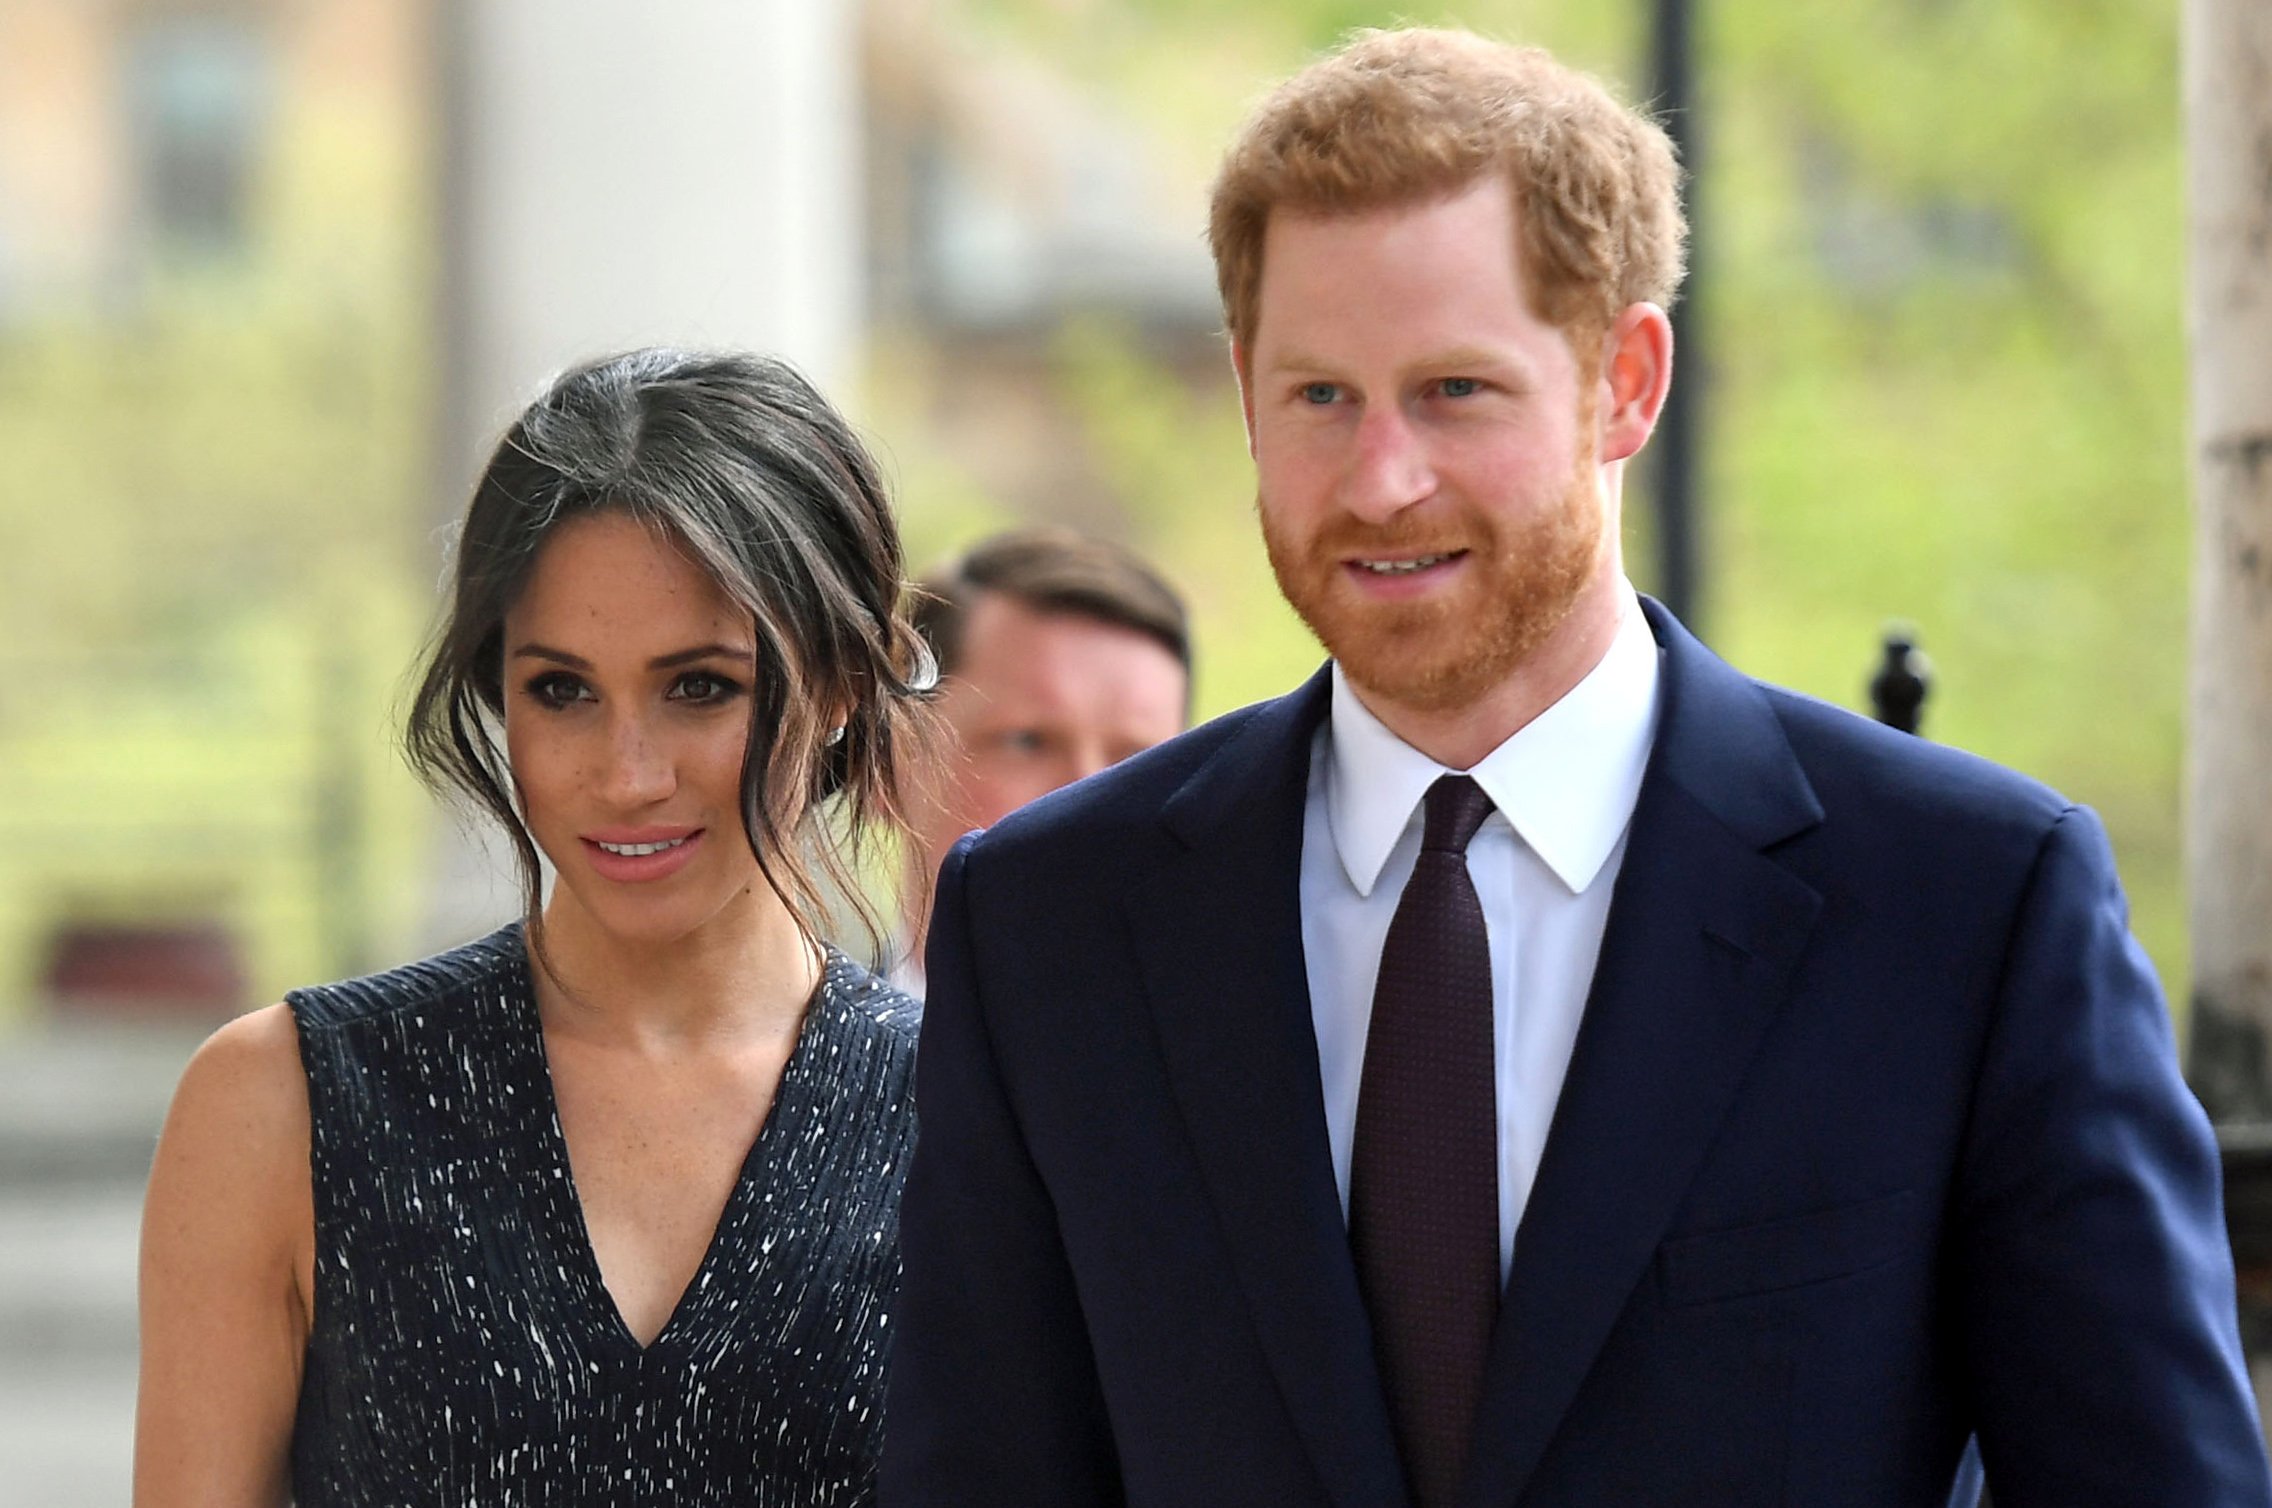 Prince Harry and Meghan Markle photographed at a memorial service in London in 2018